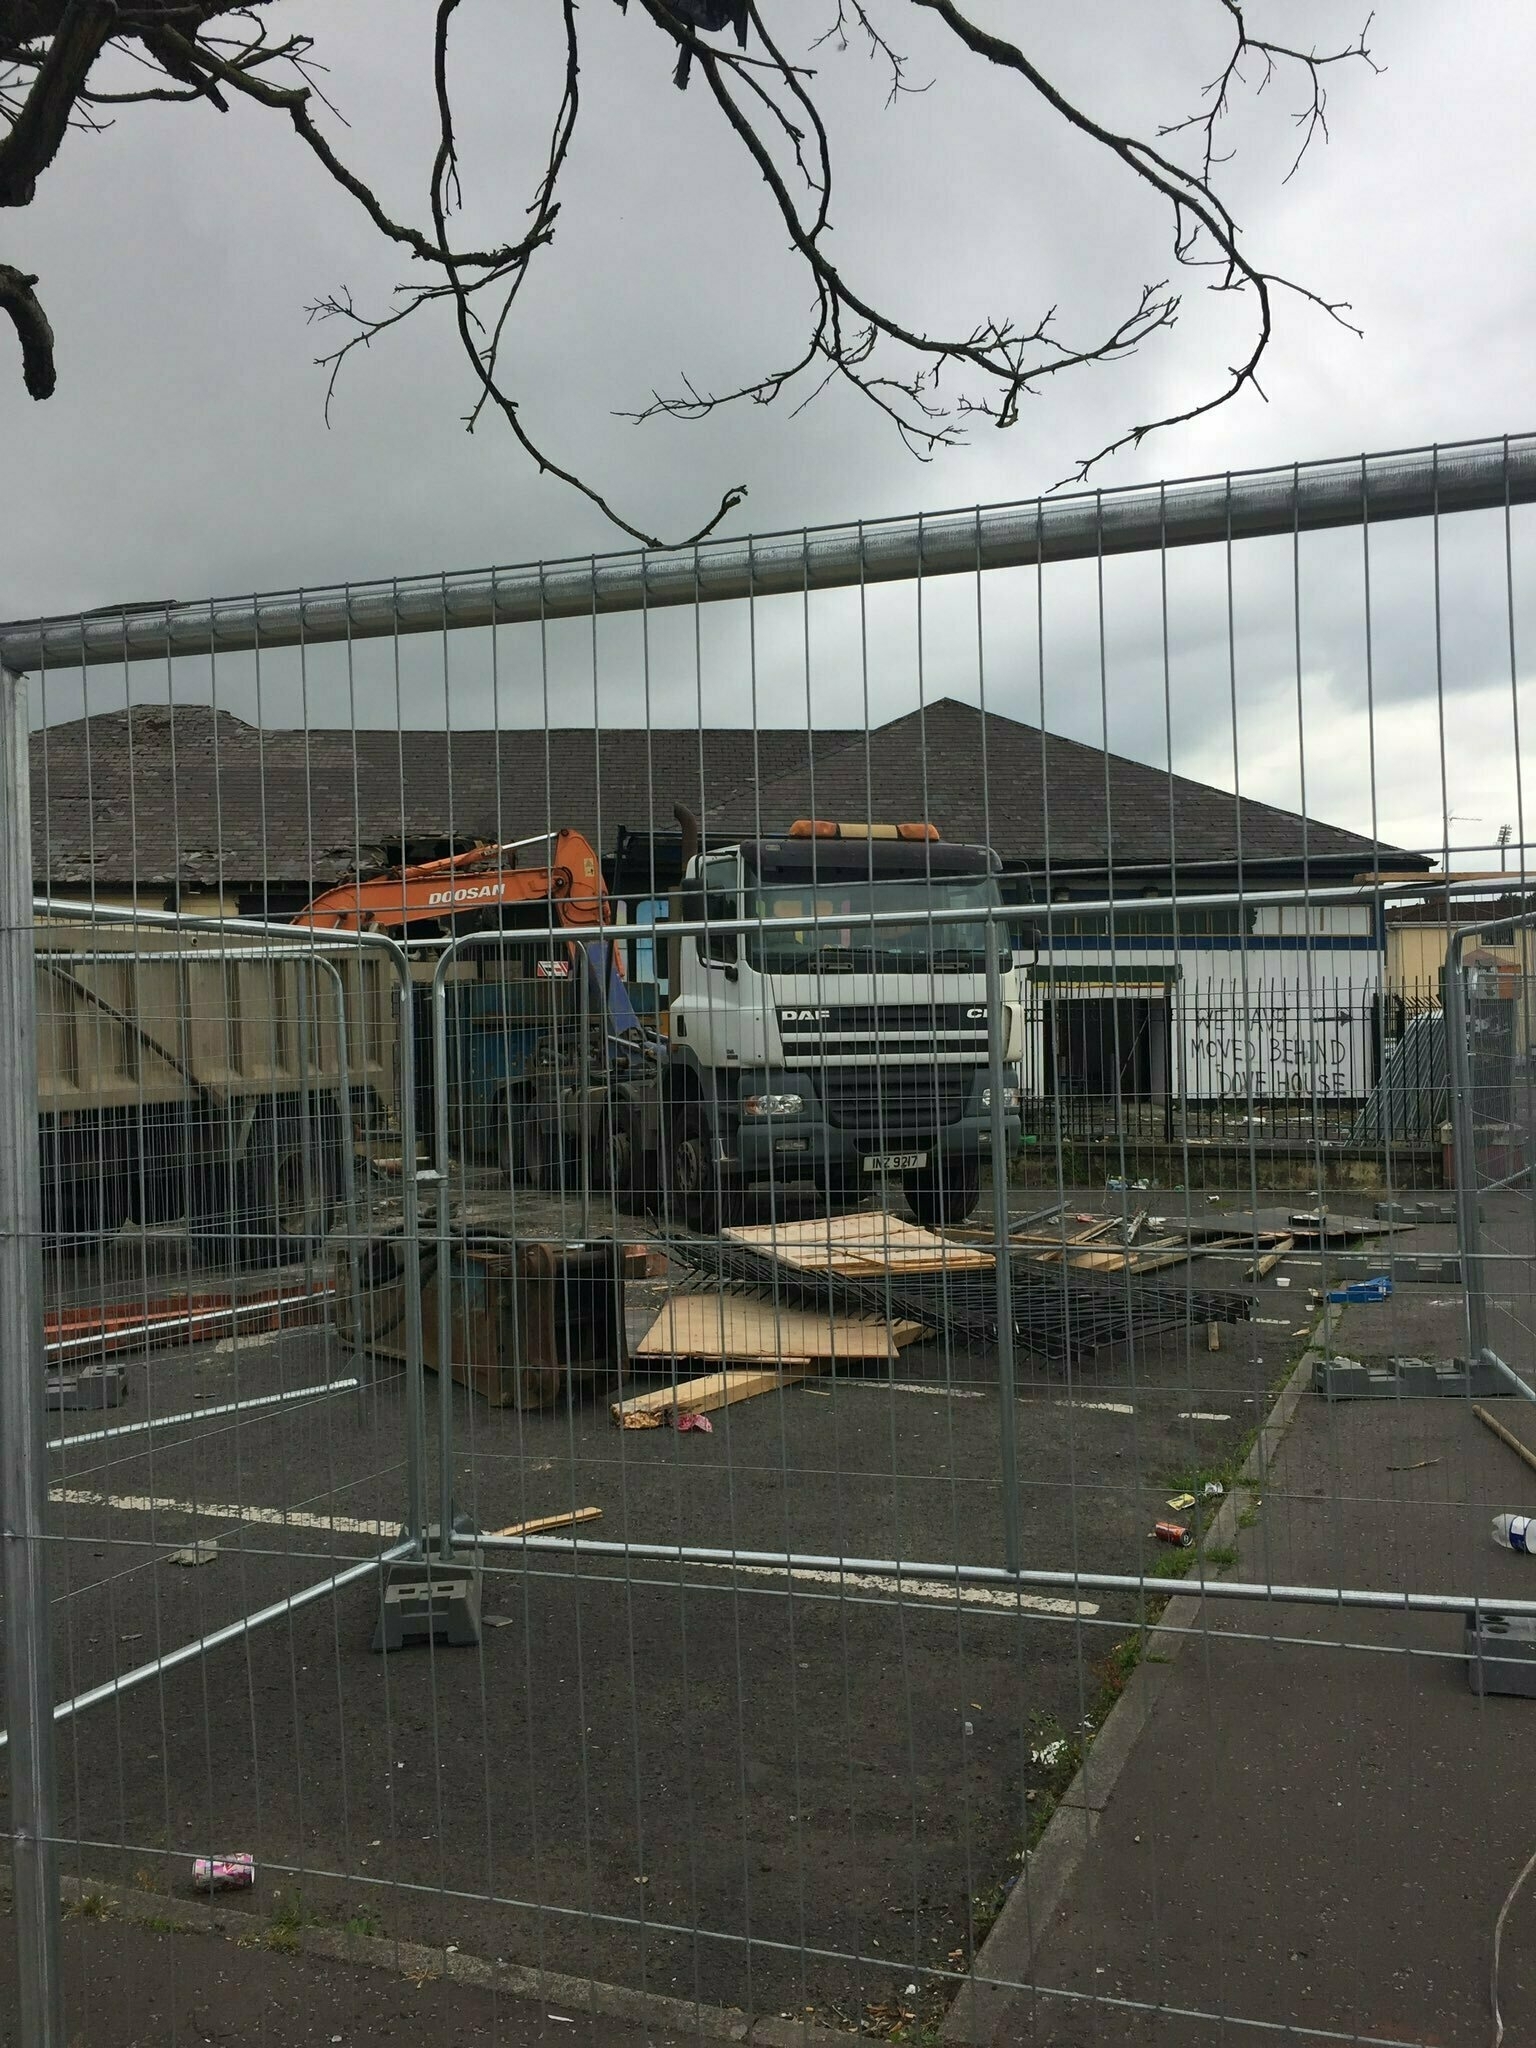 Demolition site surrounded by temporary fencing.